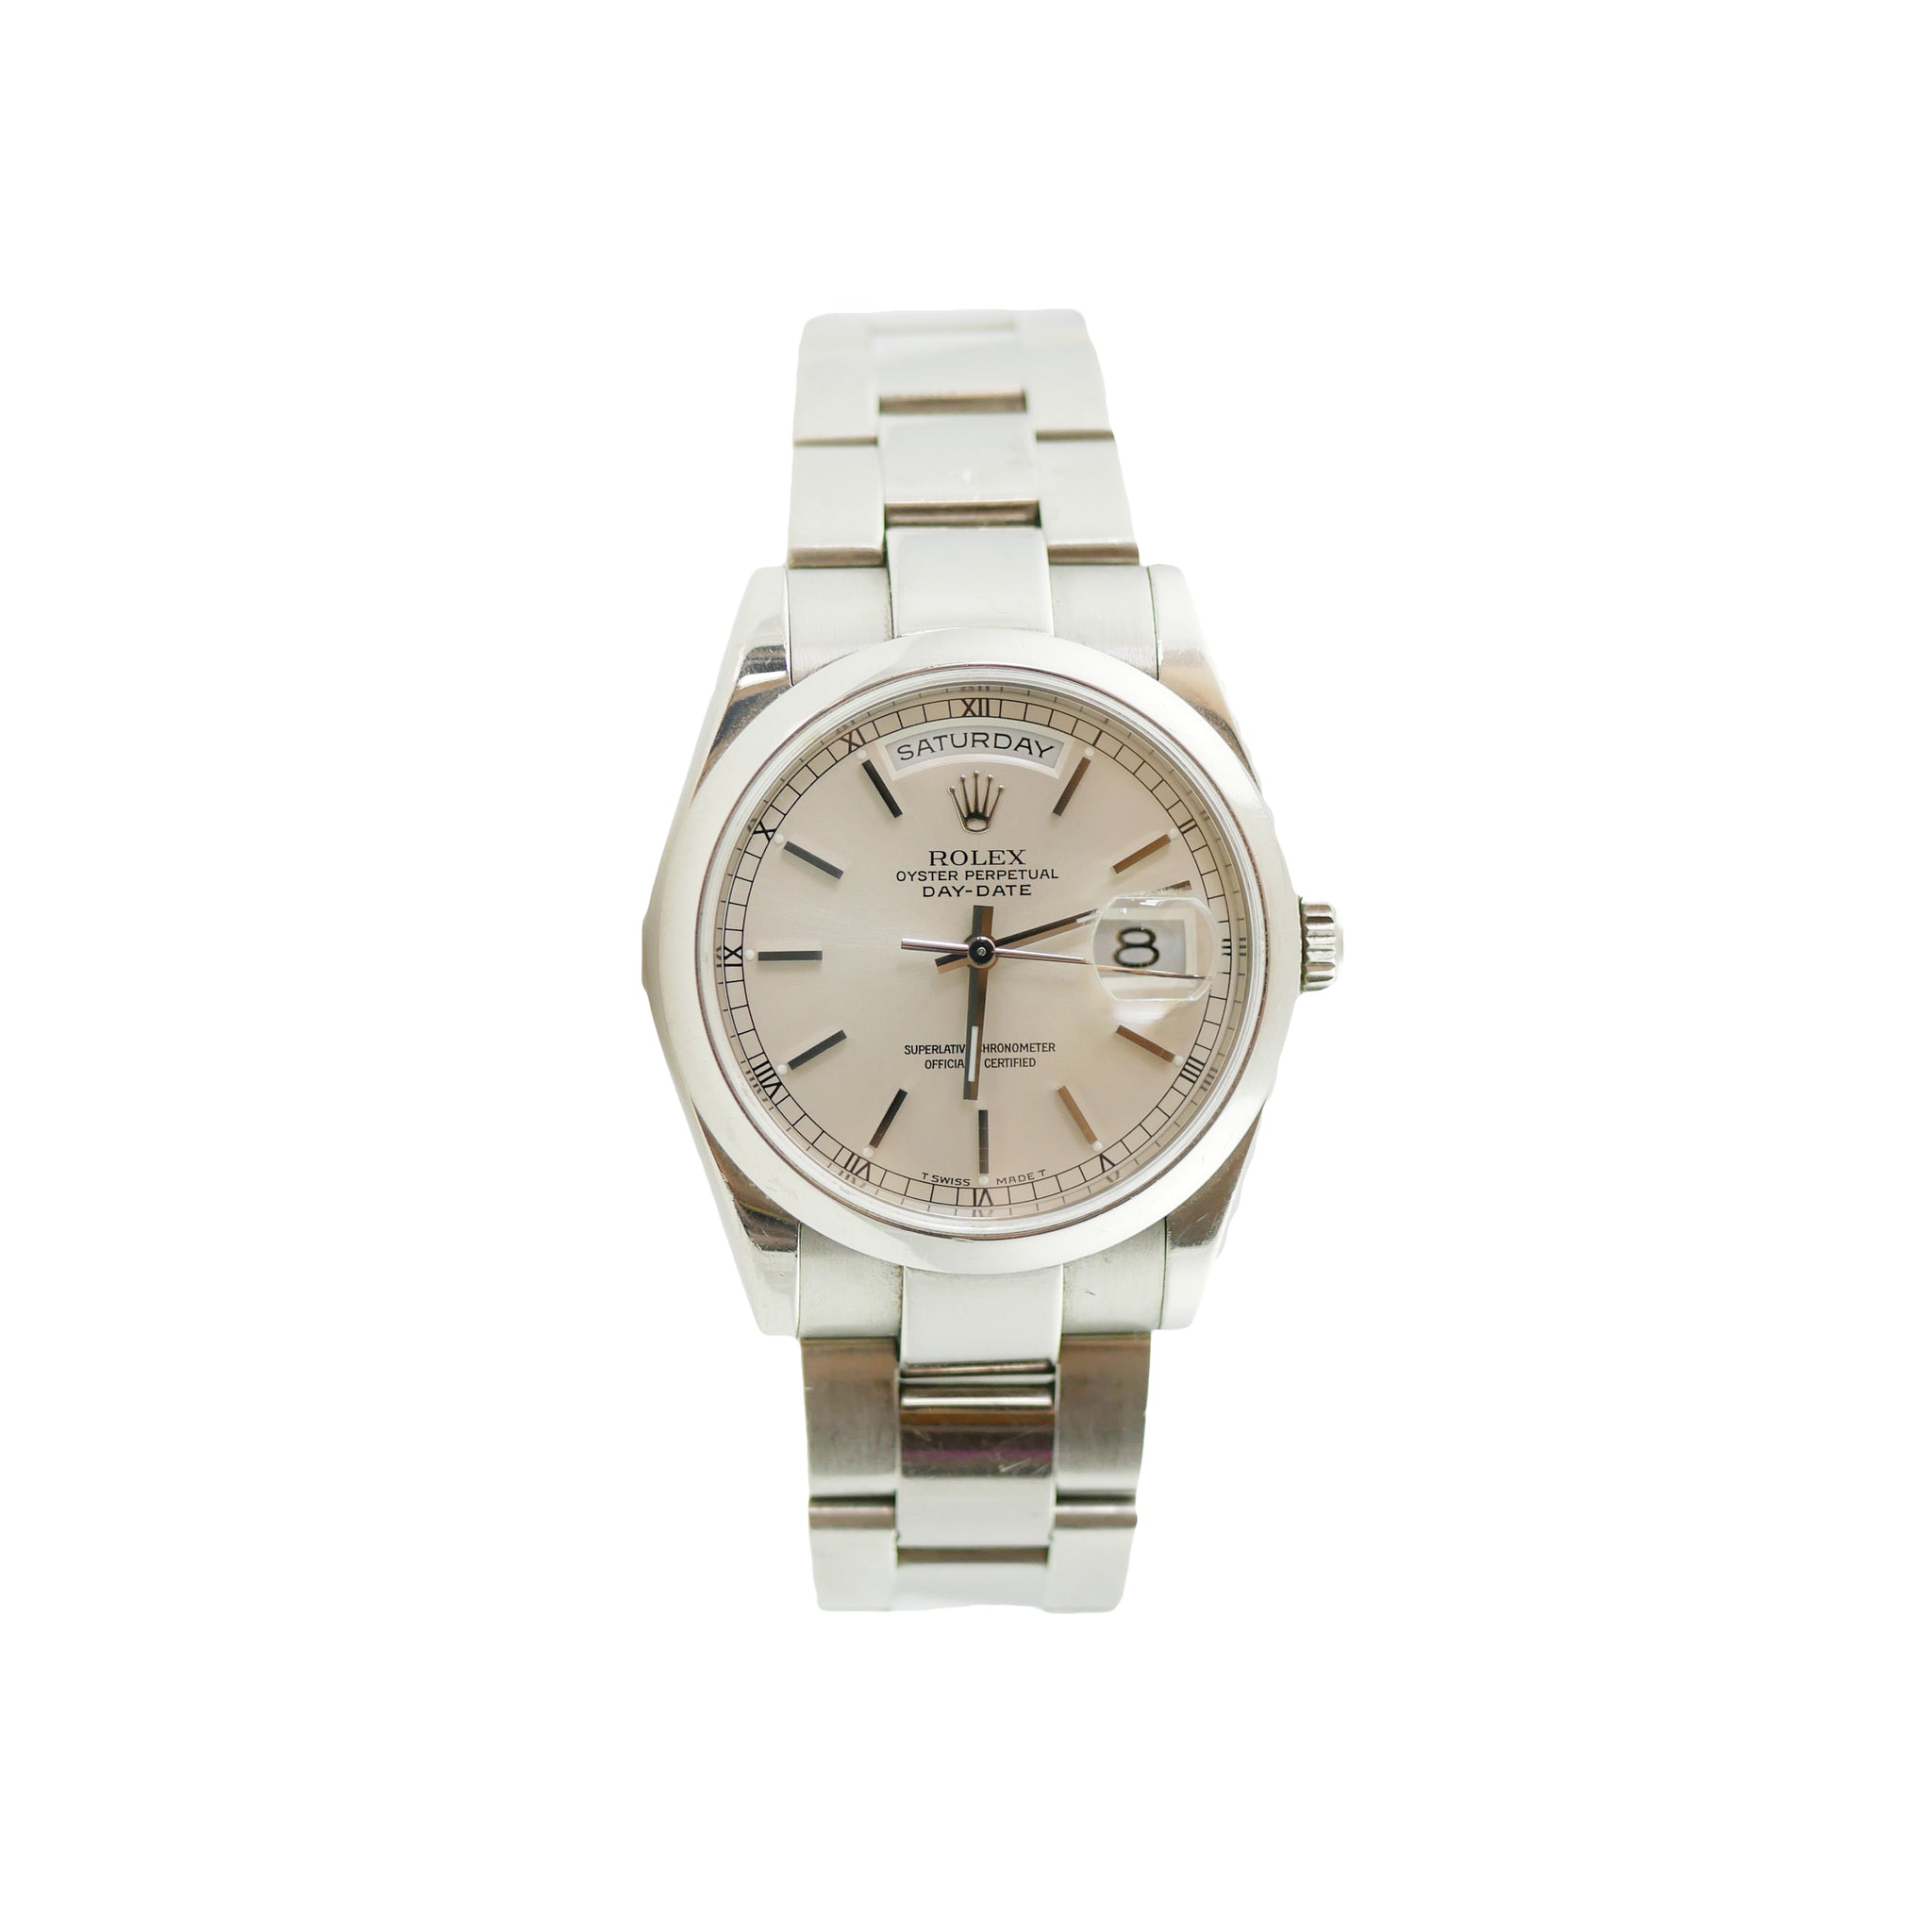 ROLEX OYSTER PERPETUAL DAY-DATE 18K WHITE GOLD